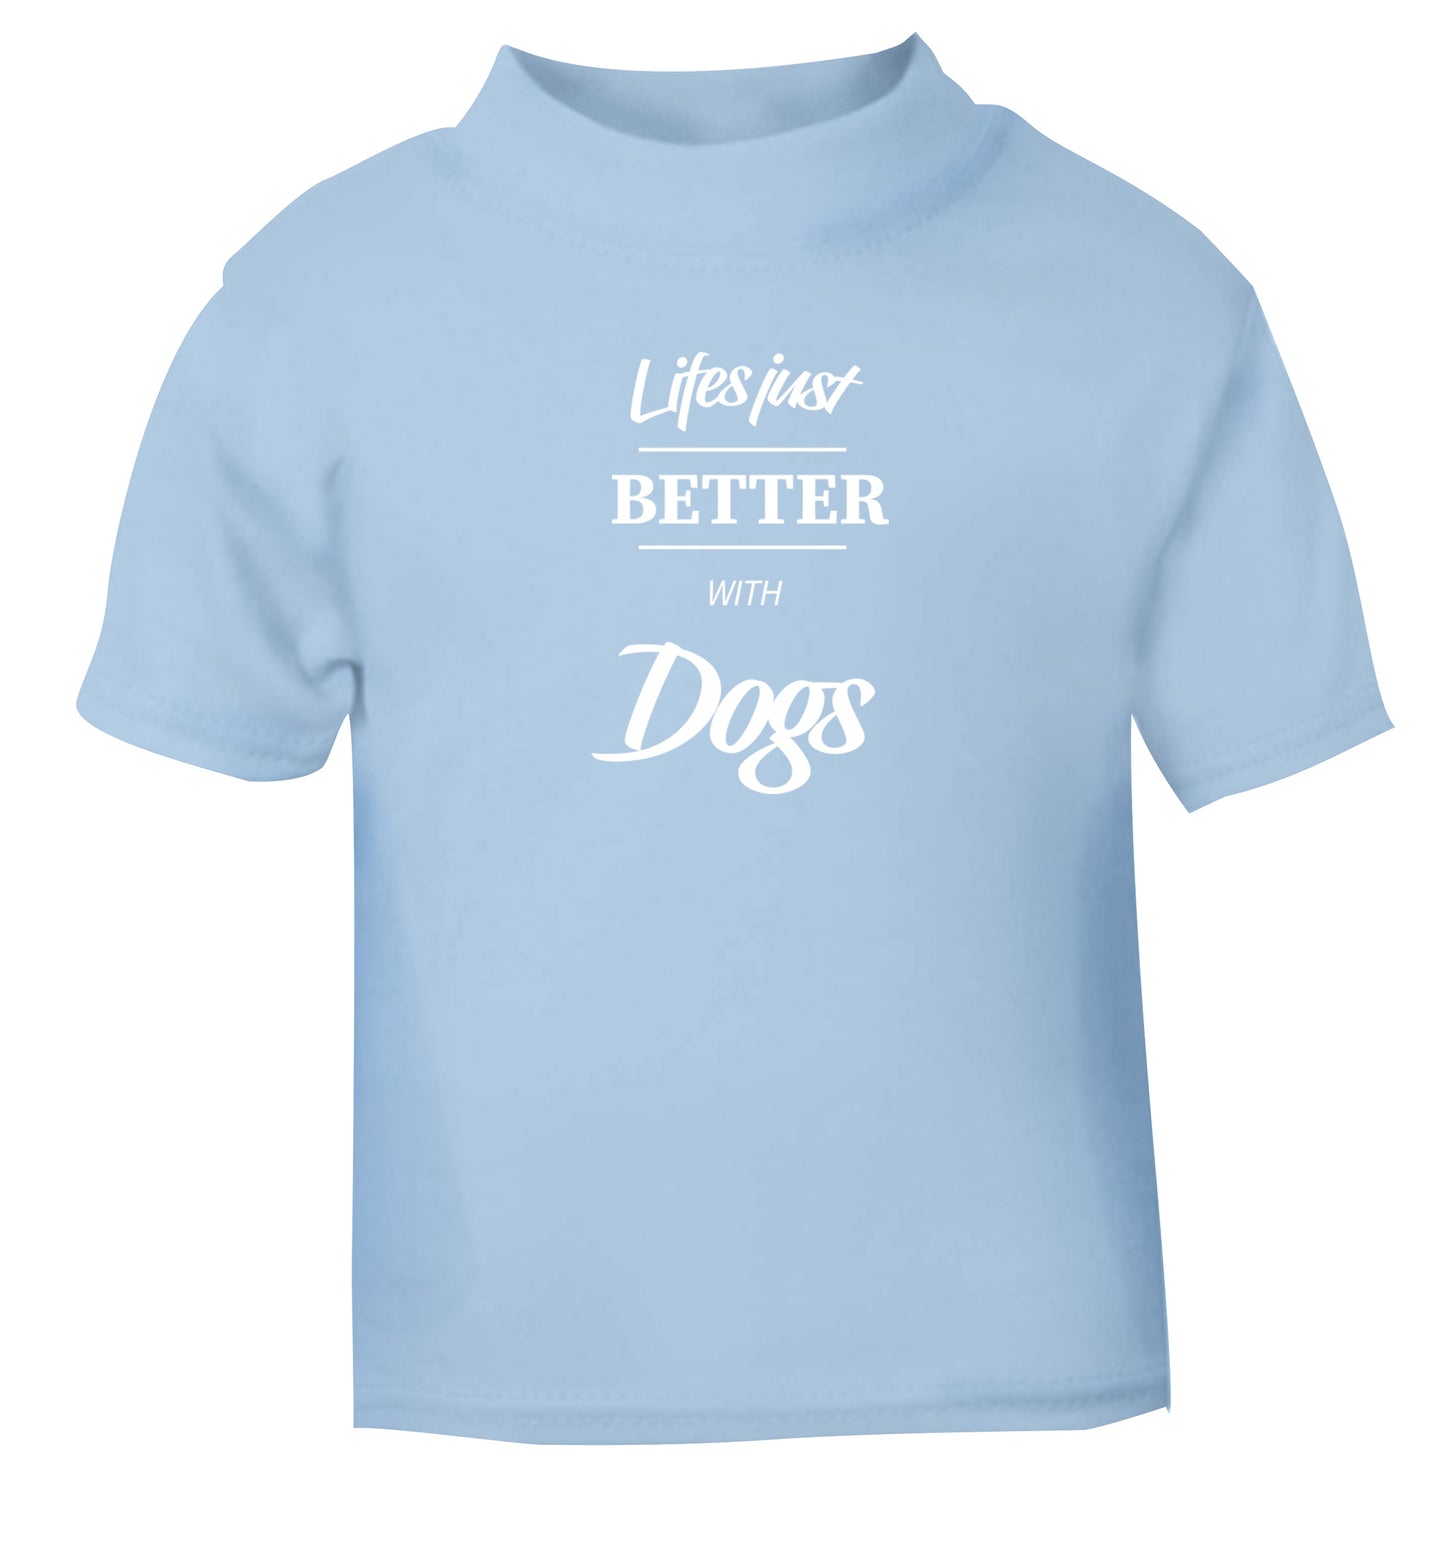 life is better with dogs light blue Baby Toddler Tshirt 2 Years